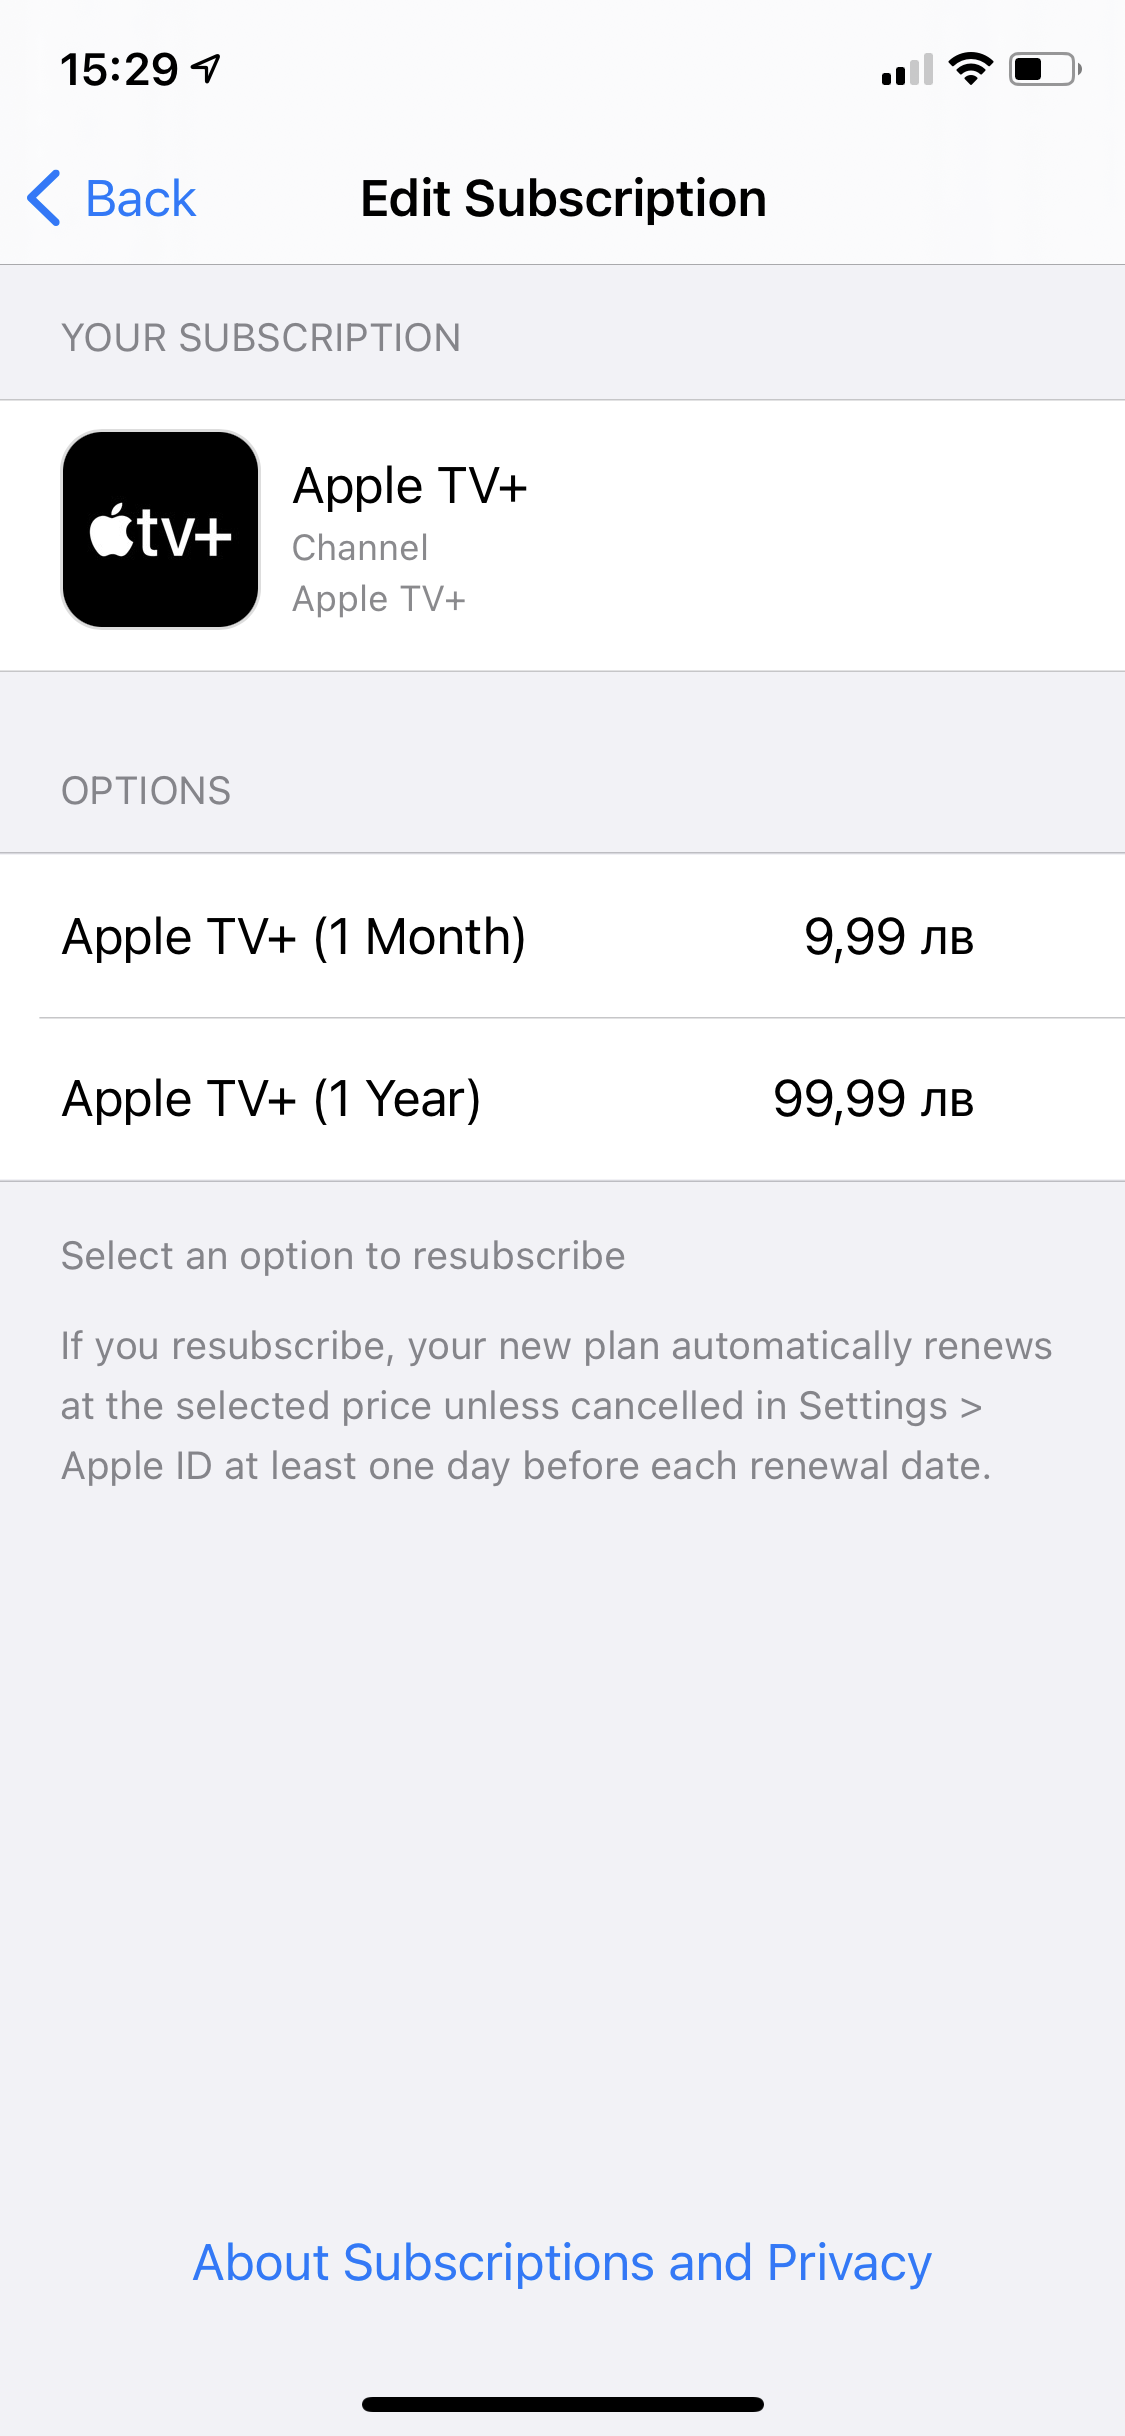 How can I cancel my subscription when it says I have multiple